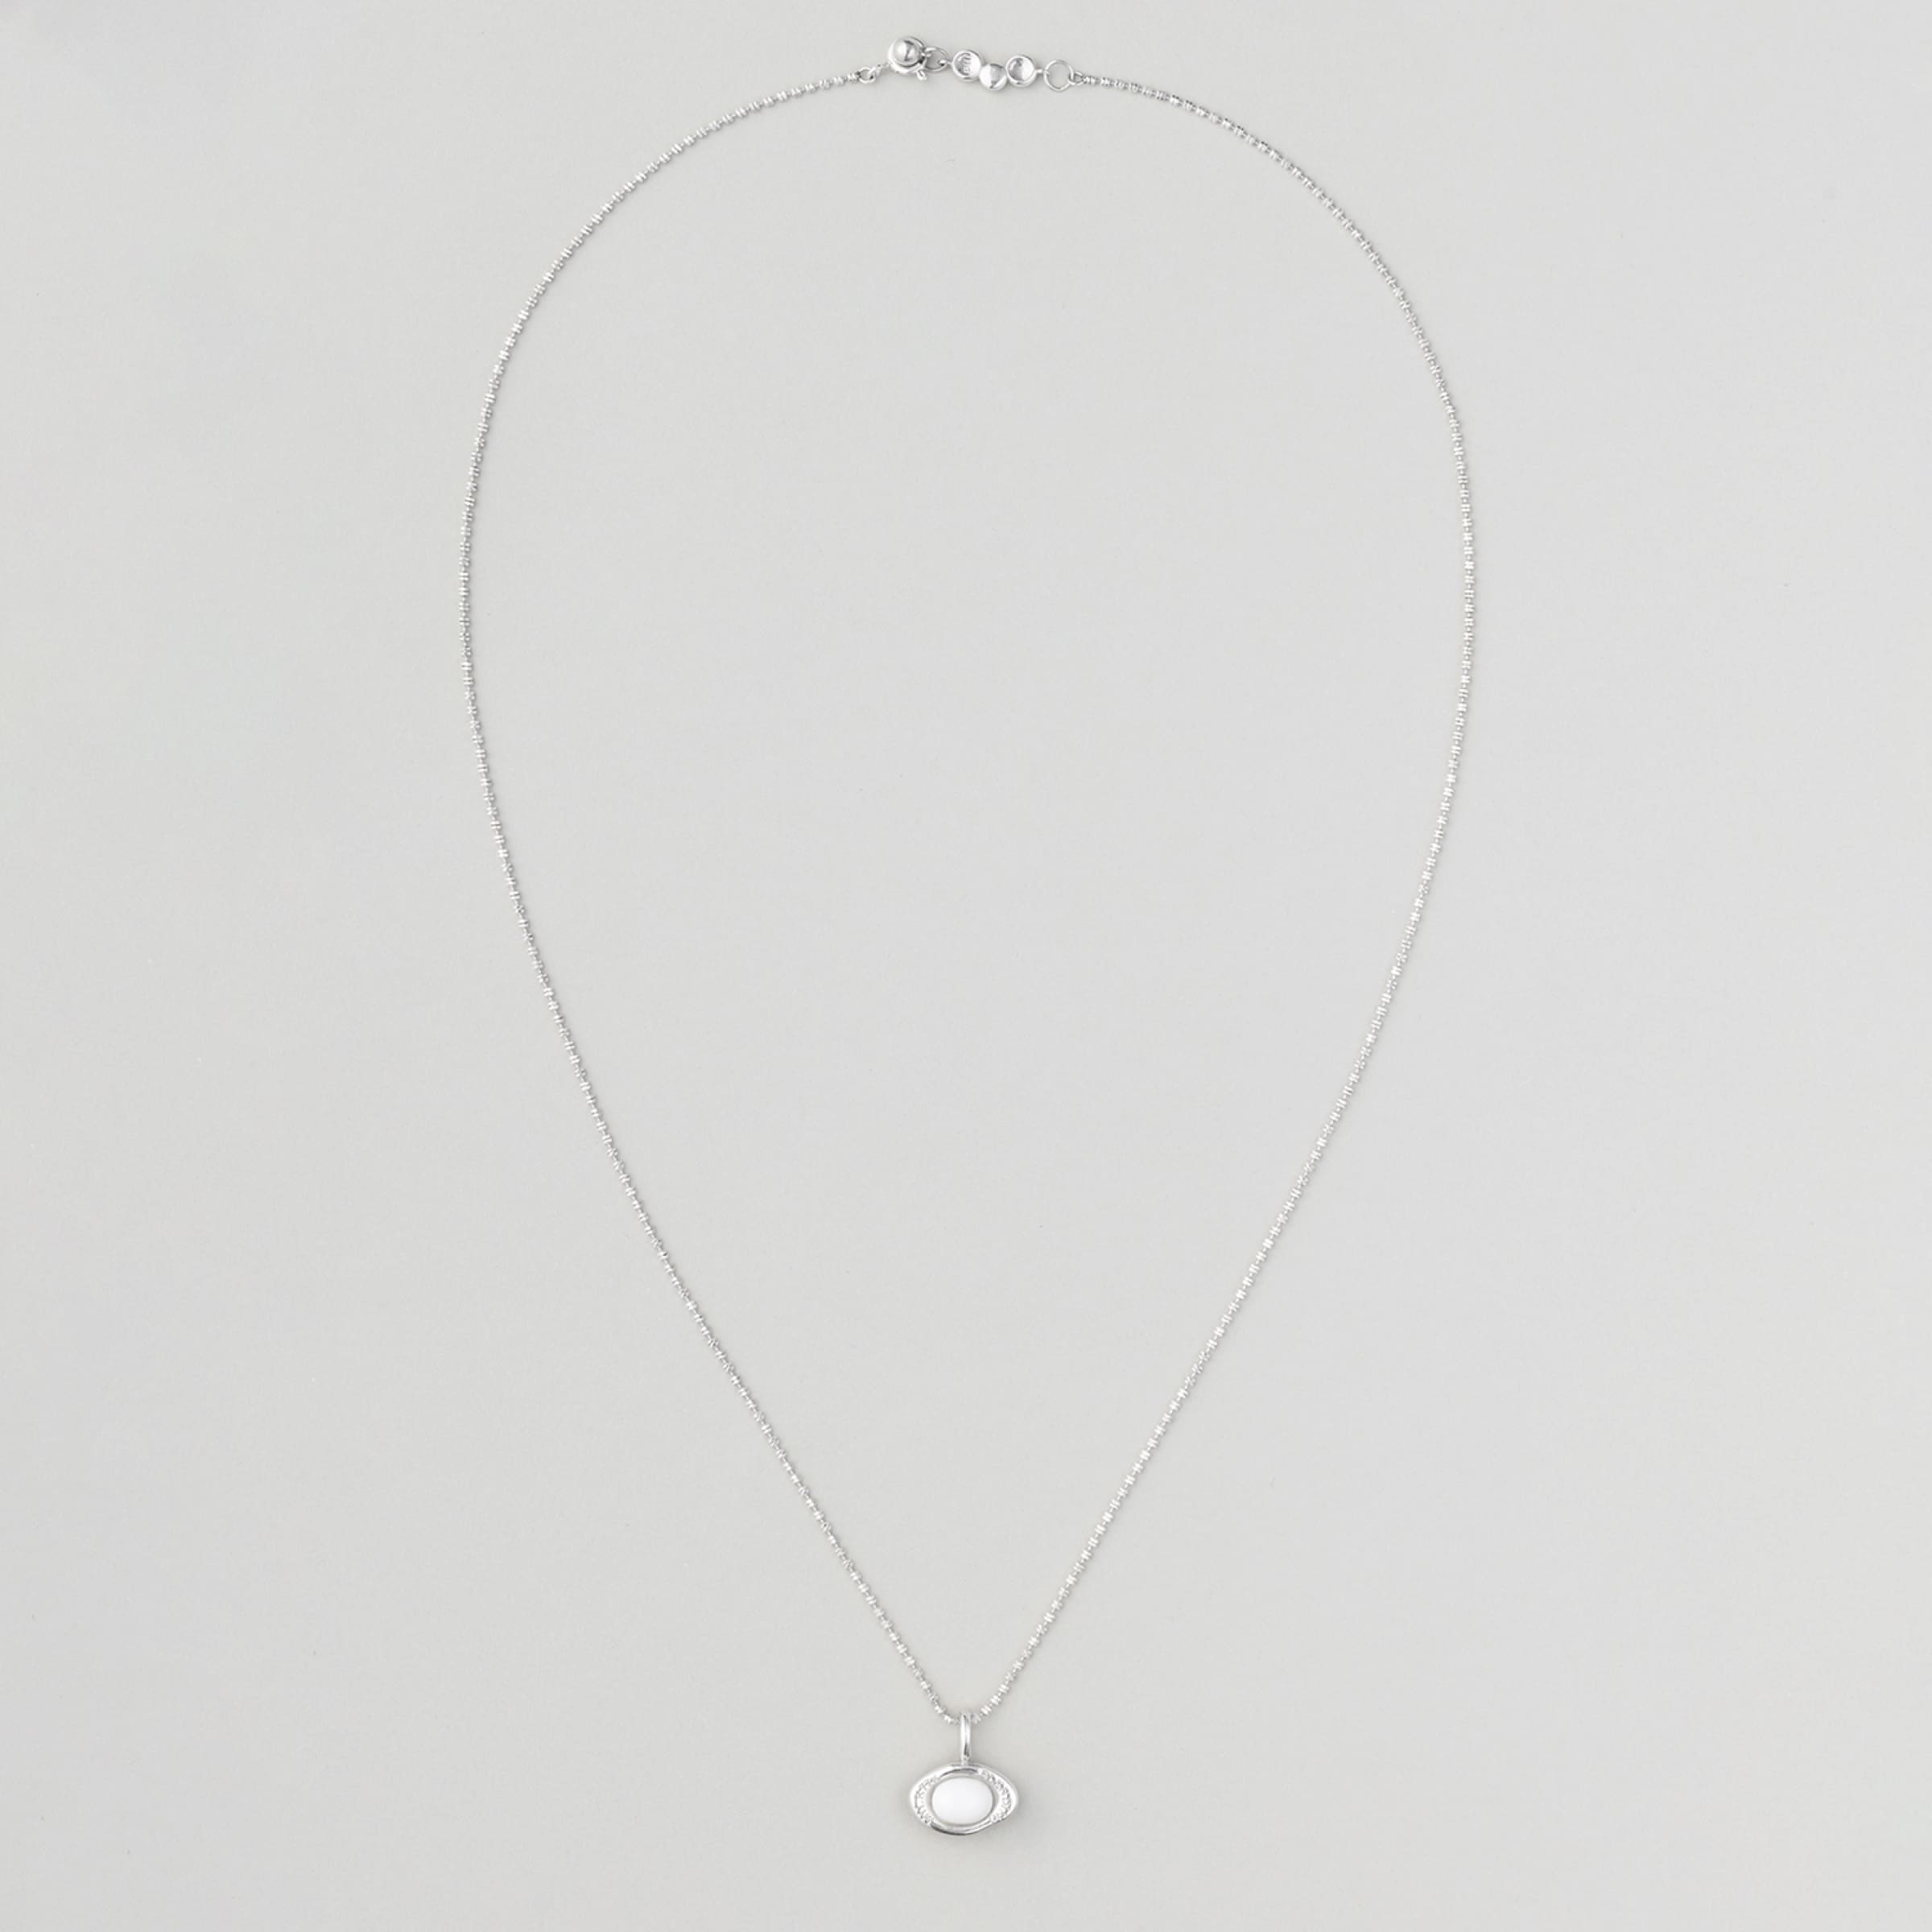 SOAPY 2WAY ミルキー ストーン シルバーネックレス / SOAPY TWO WAY MILKY STONE SILVER NECKLACE